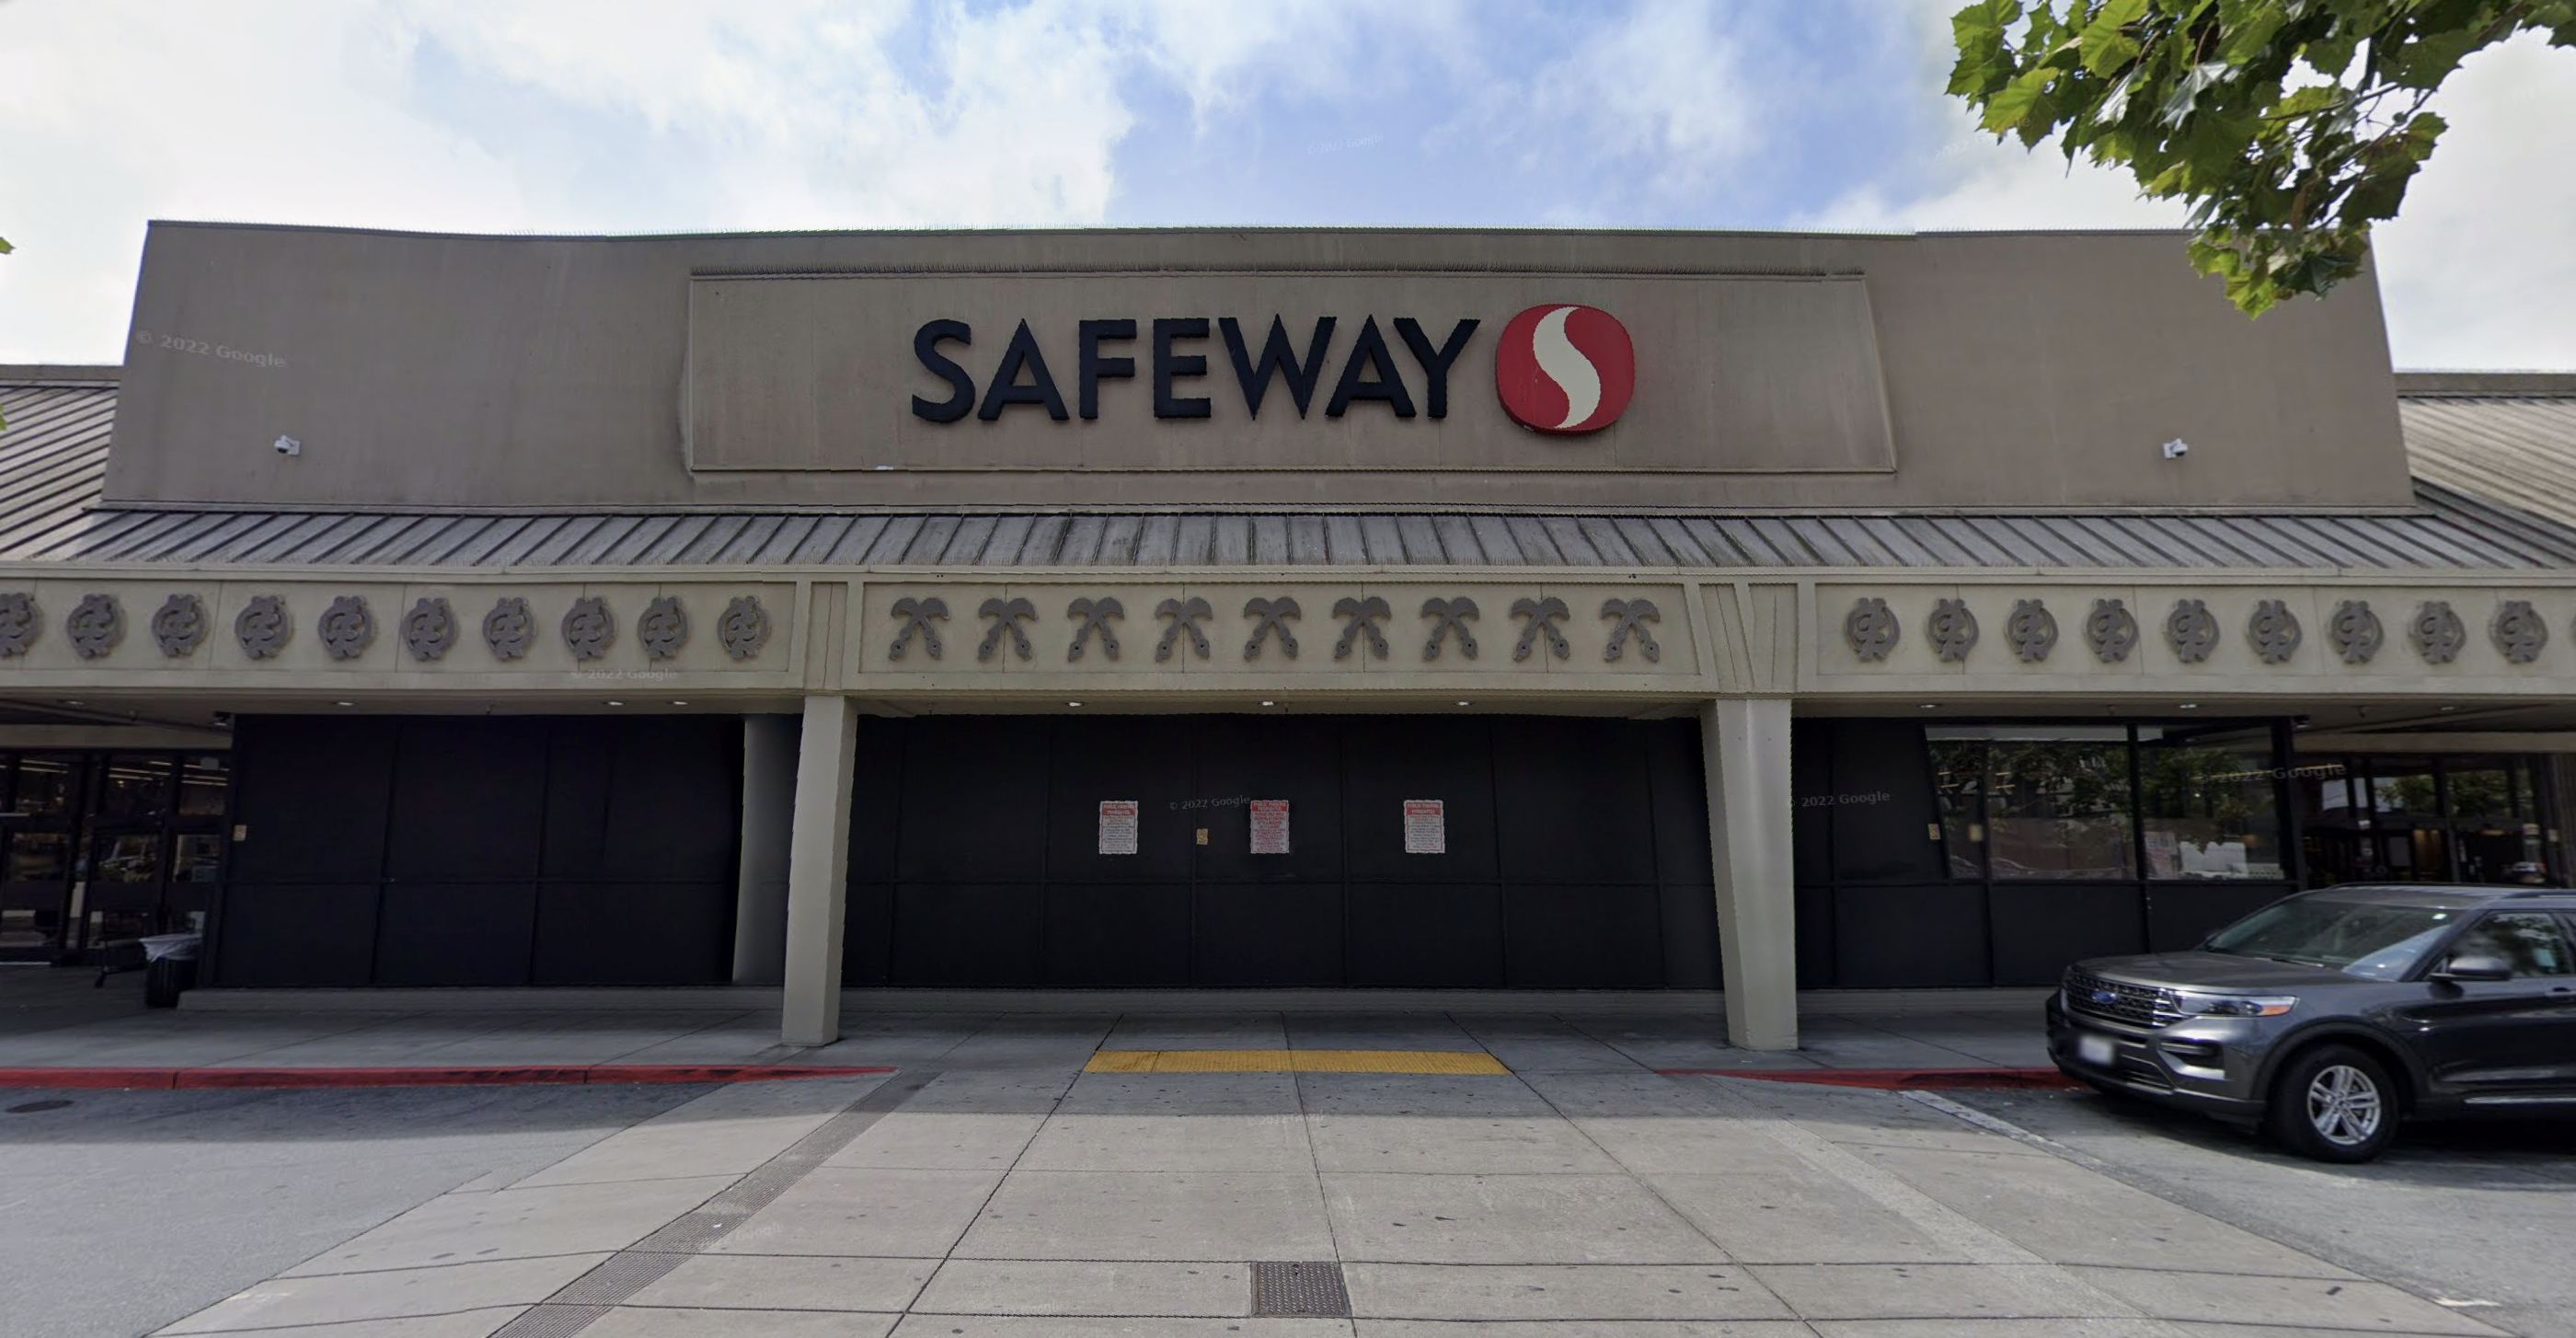 Recalled Safeway beef made Clearlake man sick, family claims - ABC7 San  Francisco